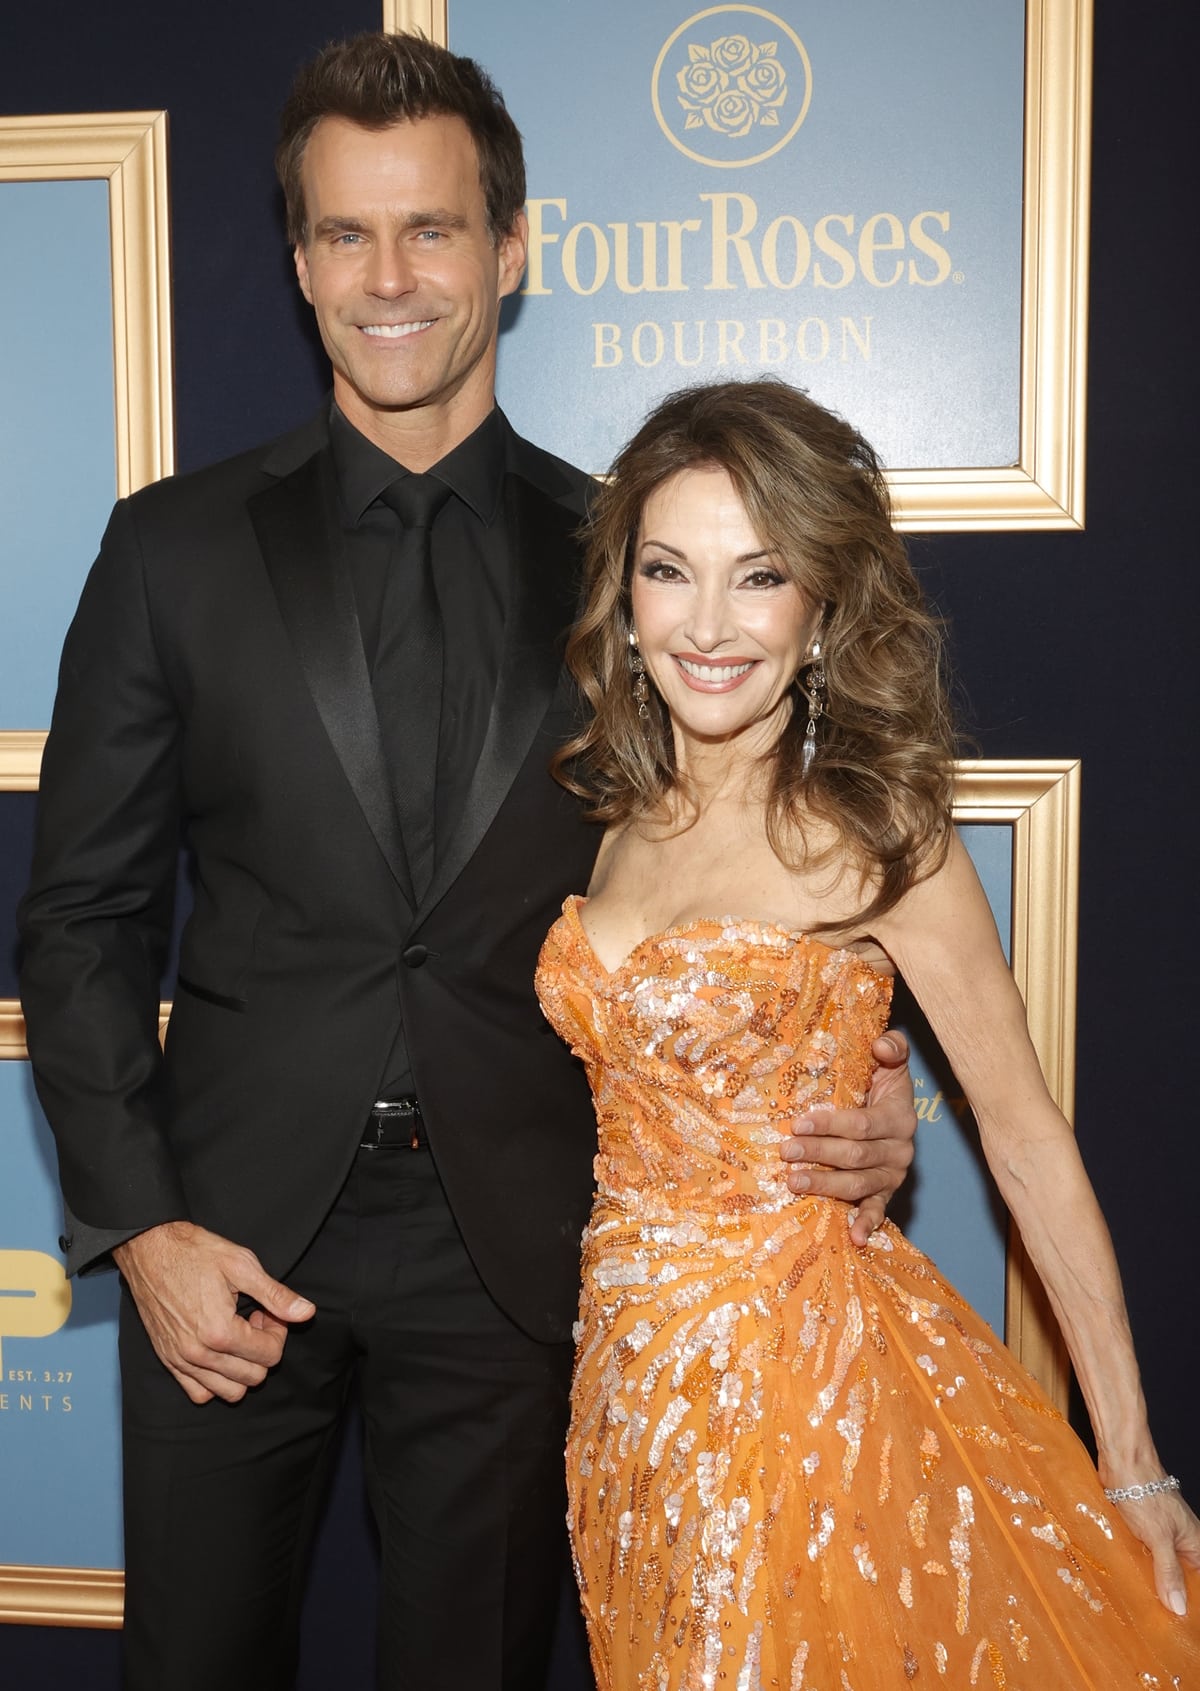 Reunion on the red carpet: 5ft 1in (155 cm) tall Susan Lucci shares a smile with her towering 6ft 2in (188 cm) former 'All My Children' co-star Cameron Mathison, at the Emmy Awards